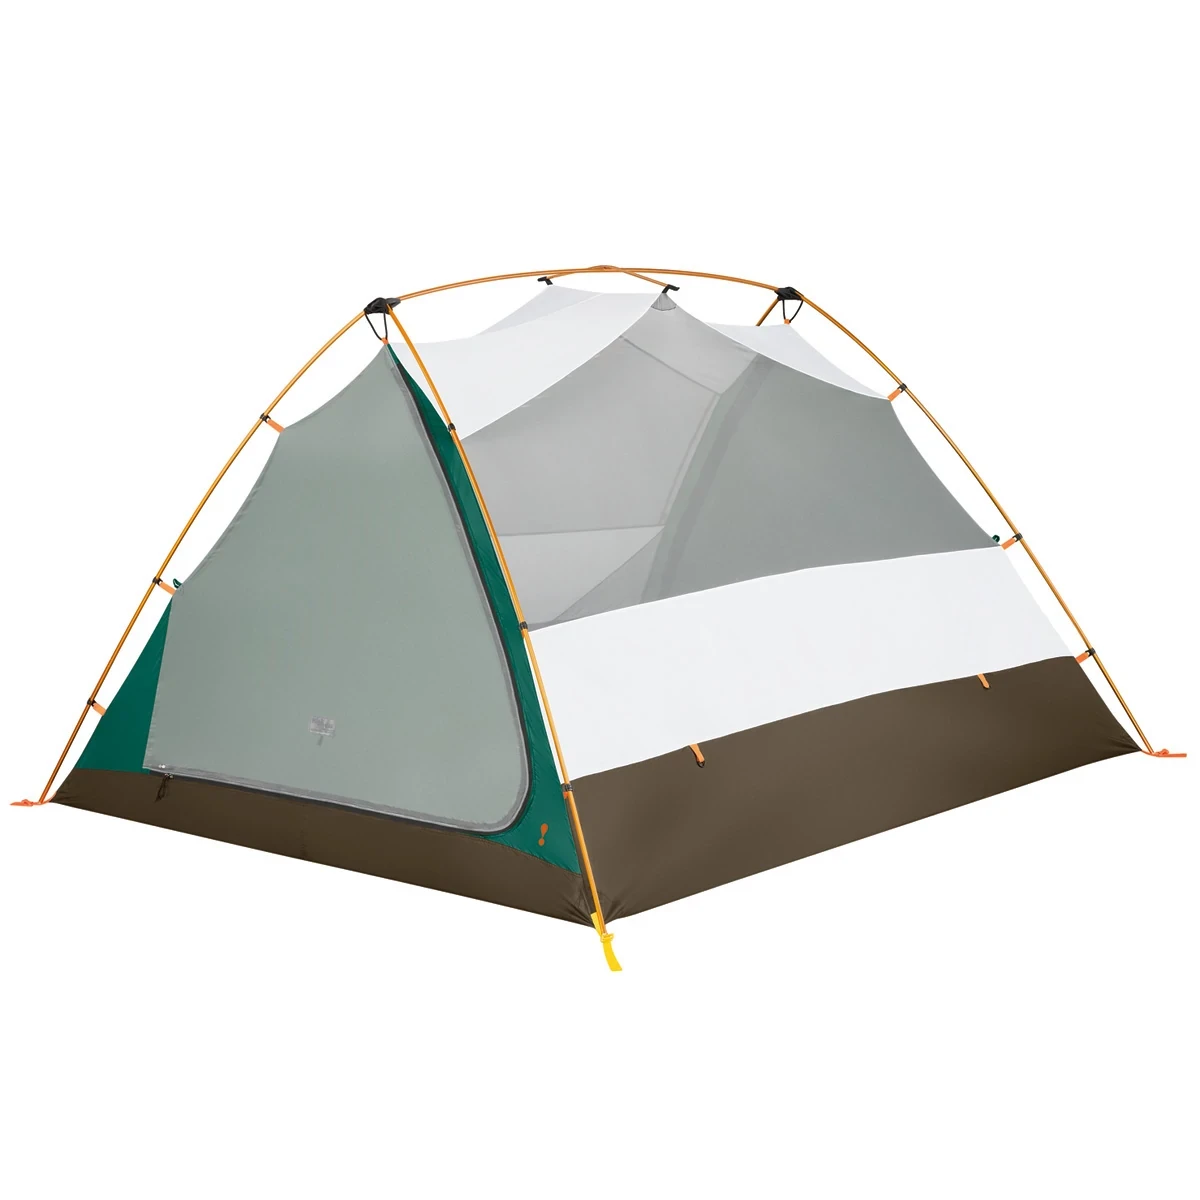 Timberline SQ 2XT 2 Person Tent without rainfly